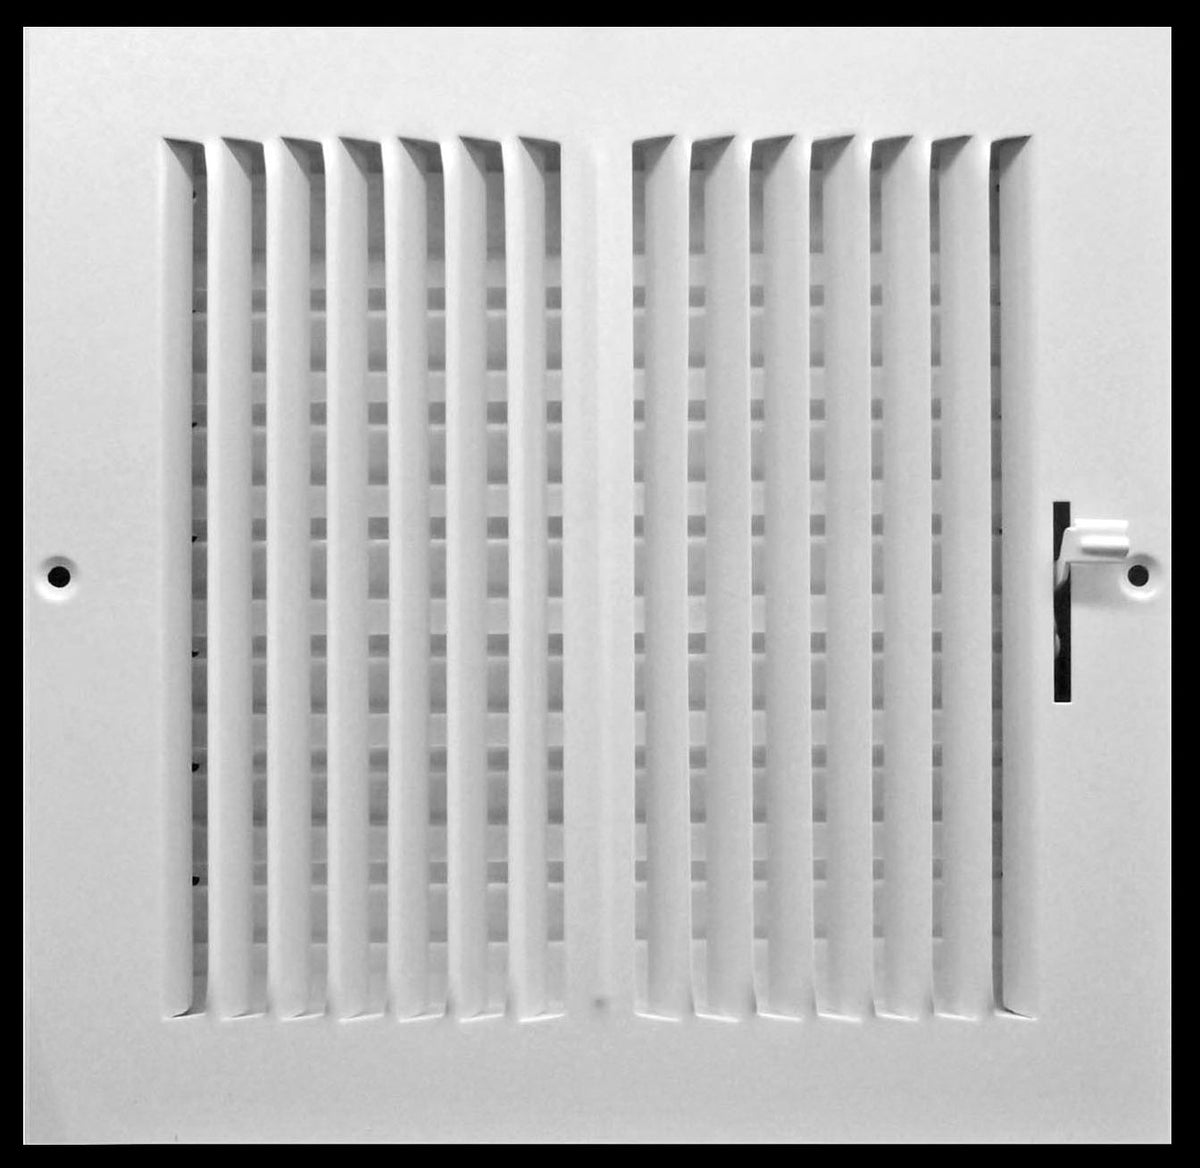 18&quot; X 18&quot; 2-Way Vertical AIR SUPPLY GRILLE - DUCT COVER &amp; DIFFUSER - Flat Stamped Face